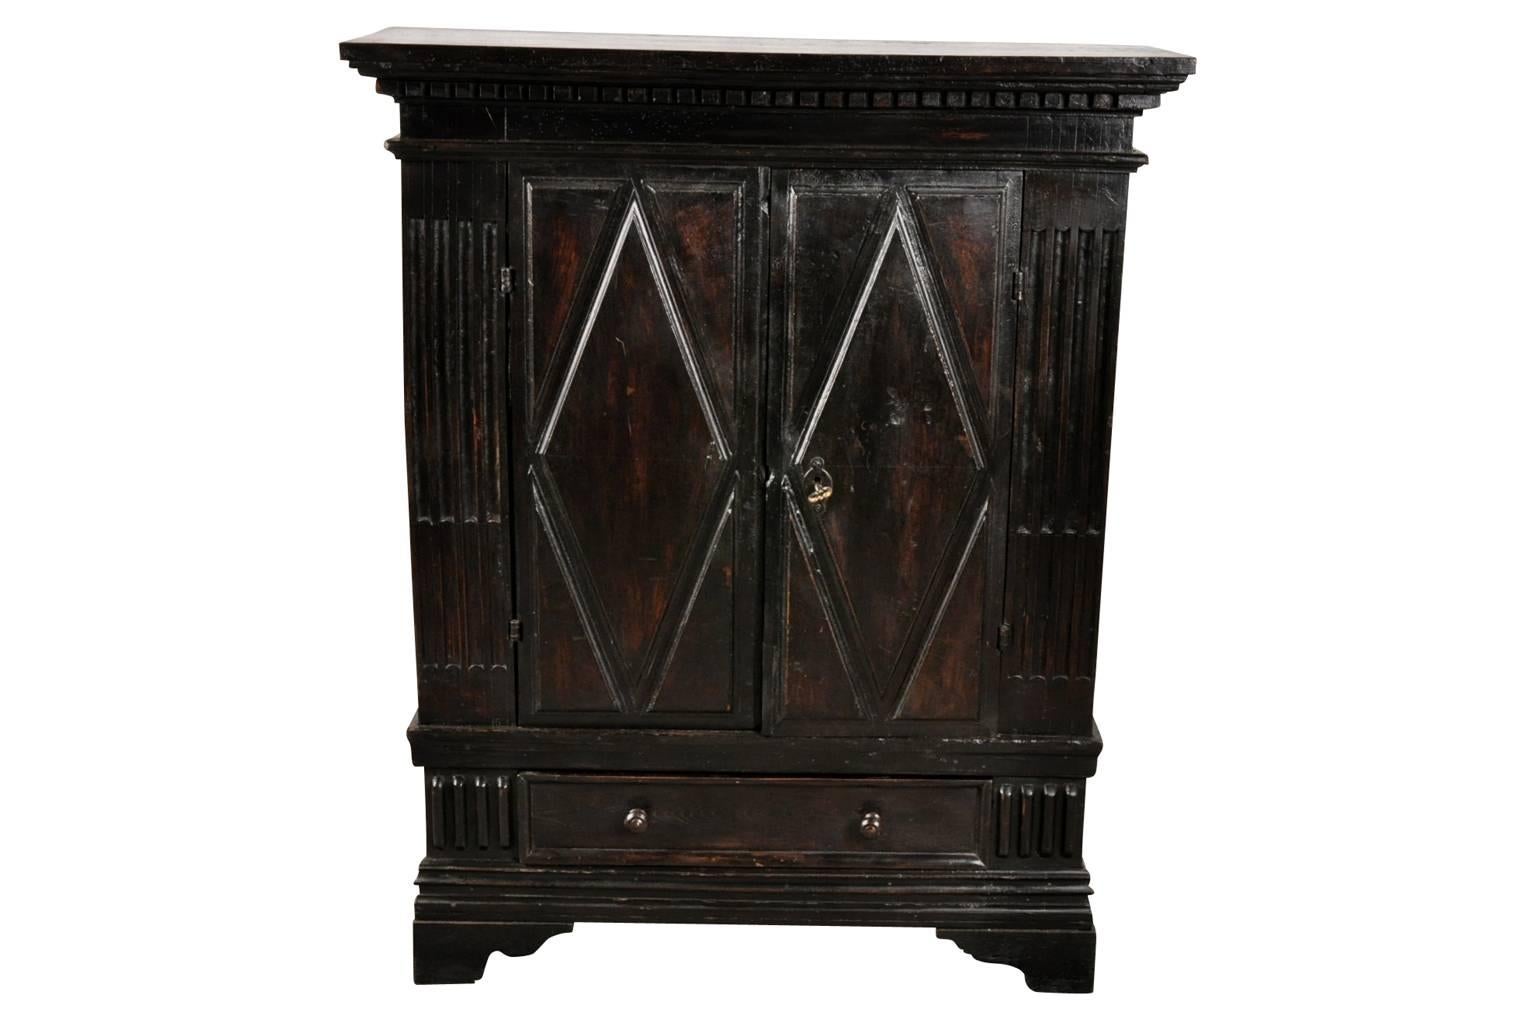 A very handsome 17th century Credenzino from Northern Italy. Wonderfully constructed from black walnut with lozenge door panels and raised on bracket feet.